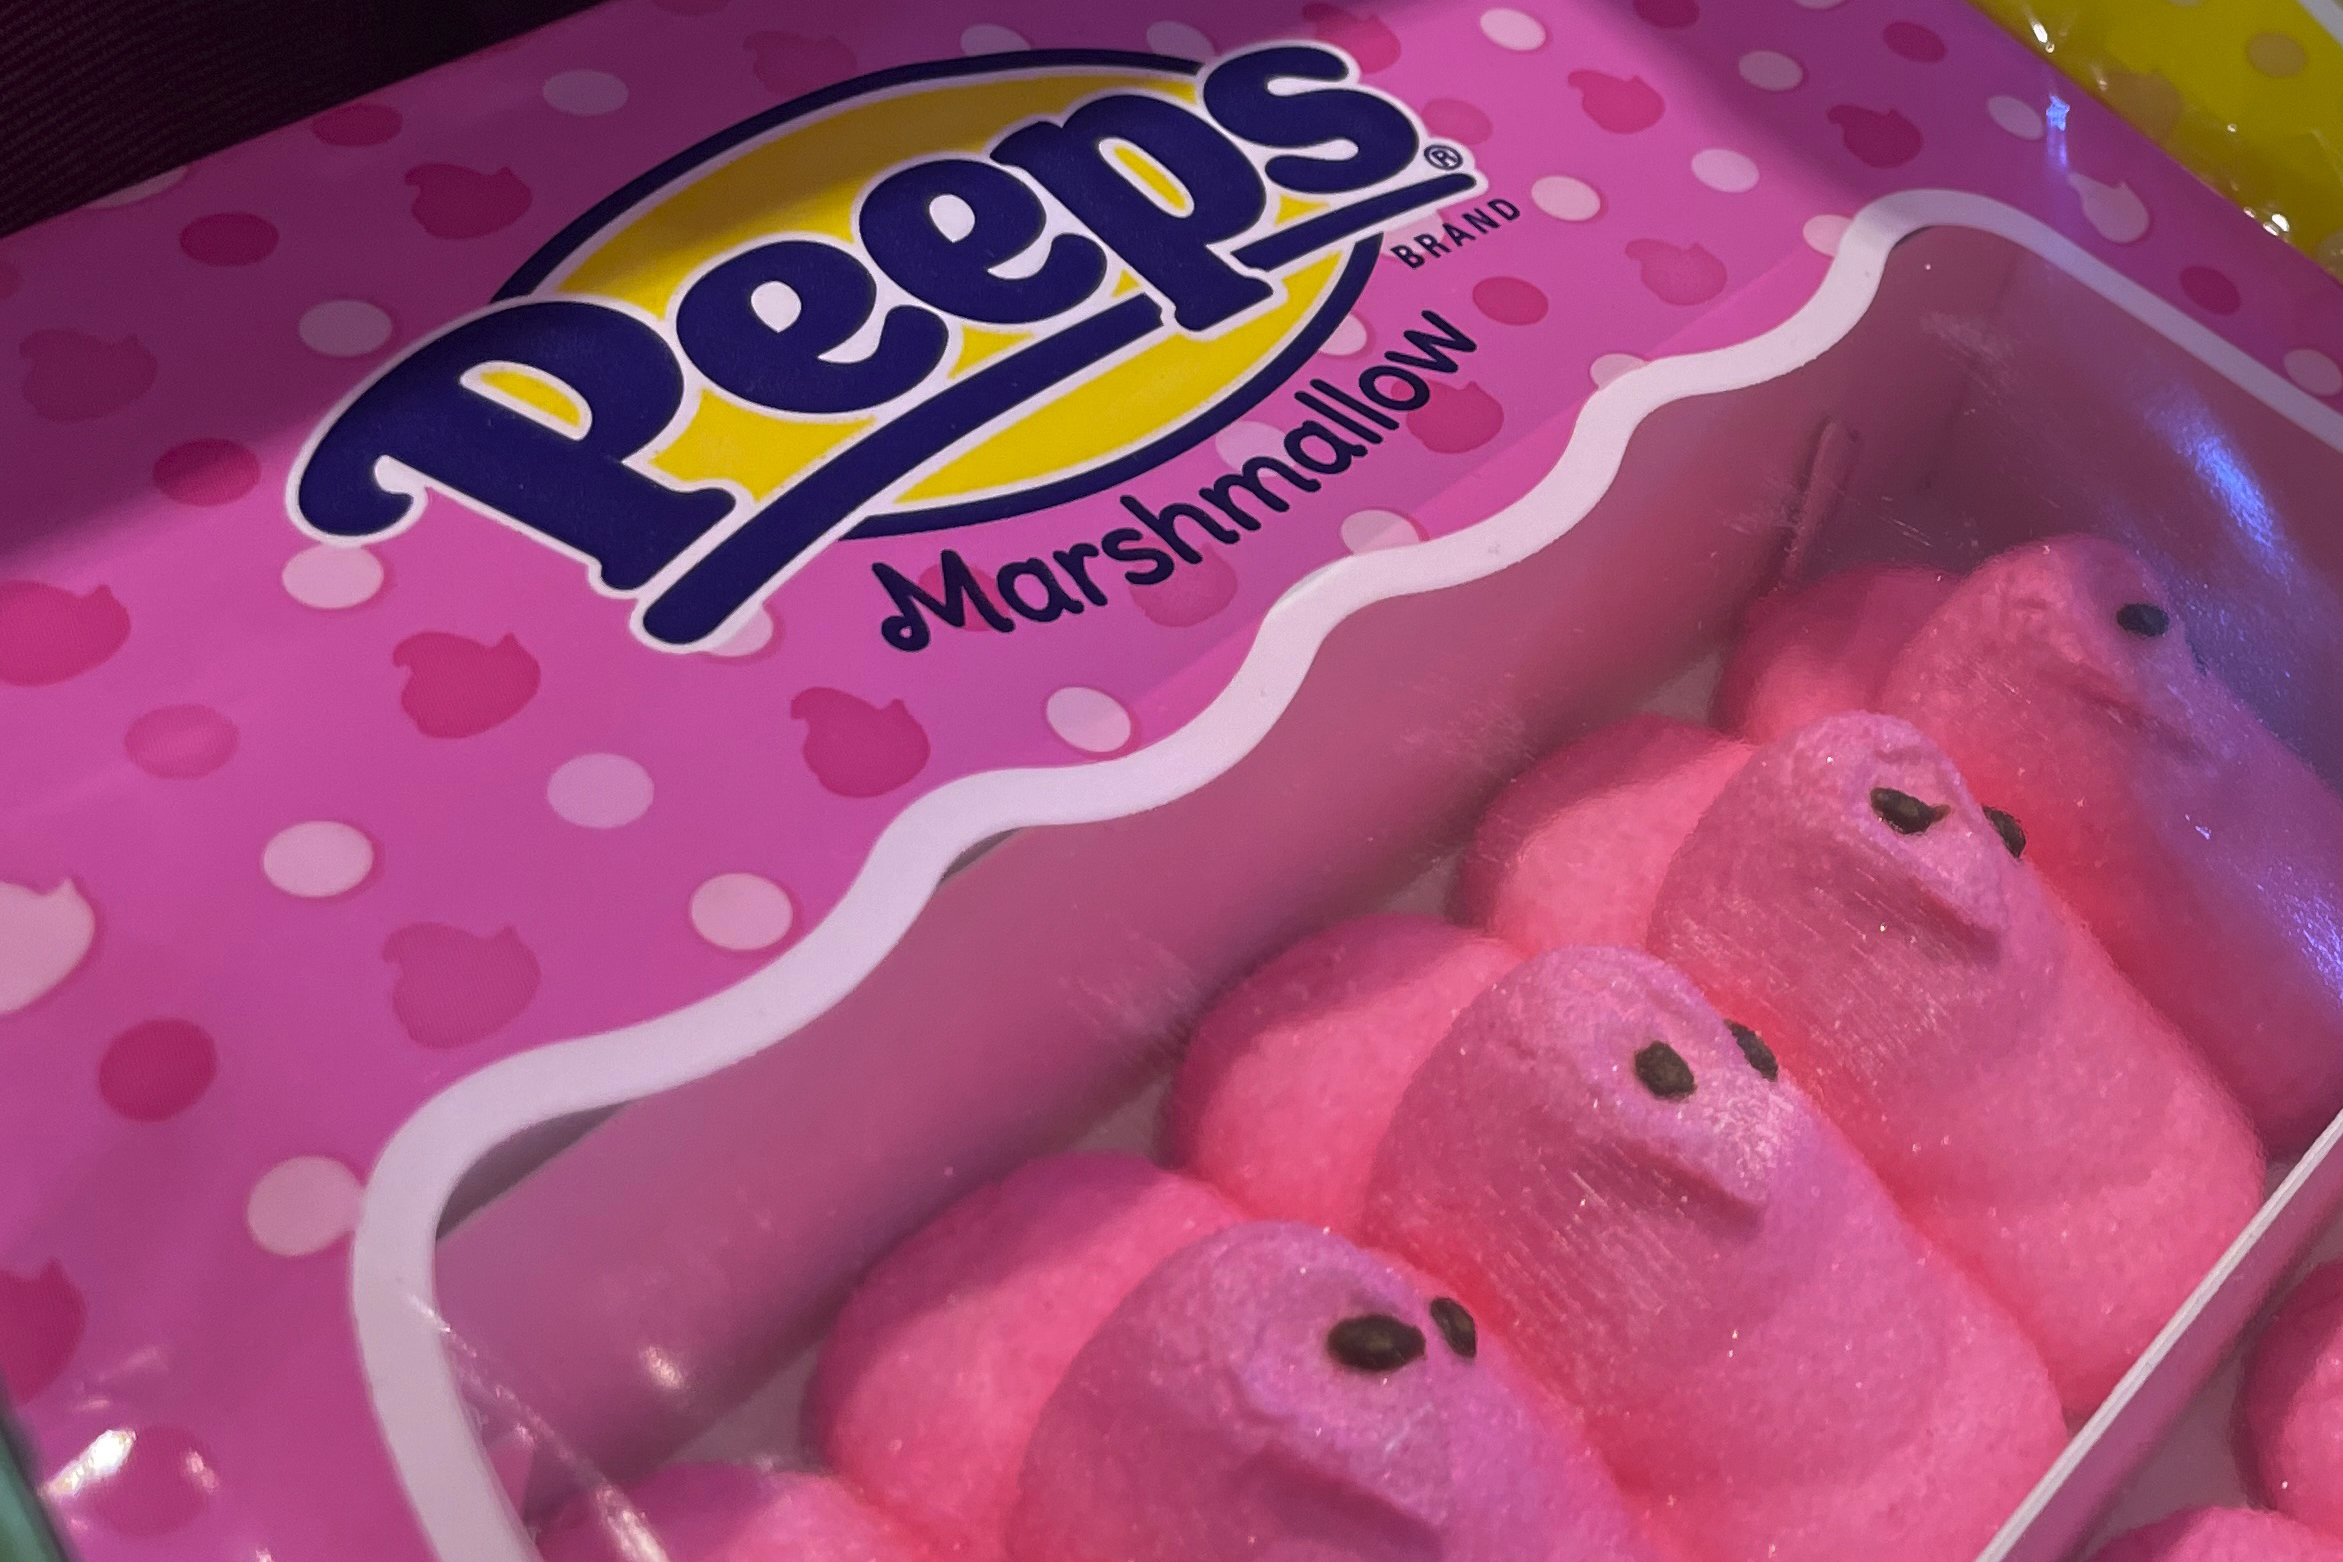 Marshmallow Peeps candy is on display at a store in Lafayette, Calif., on March 24, 2023. A Califor...